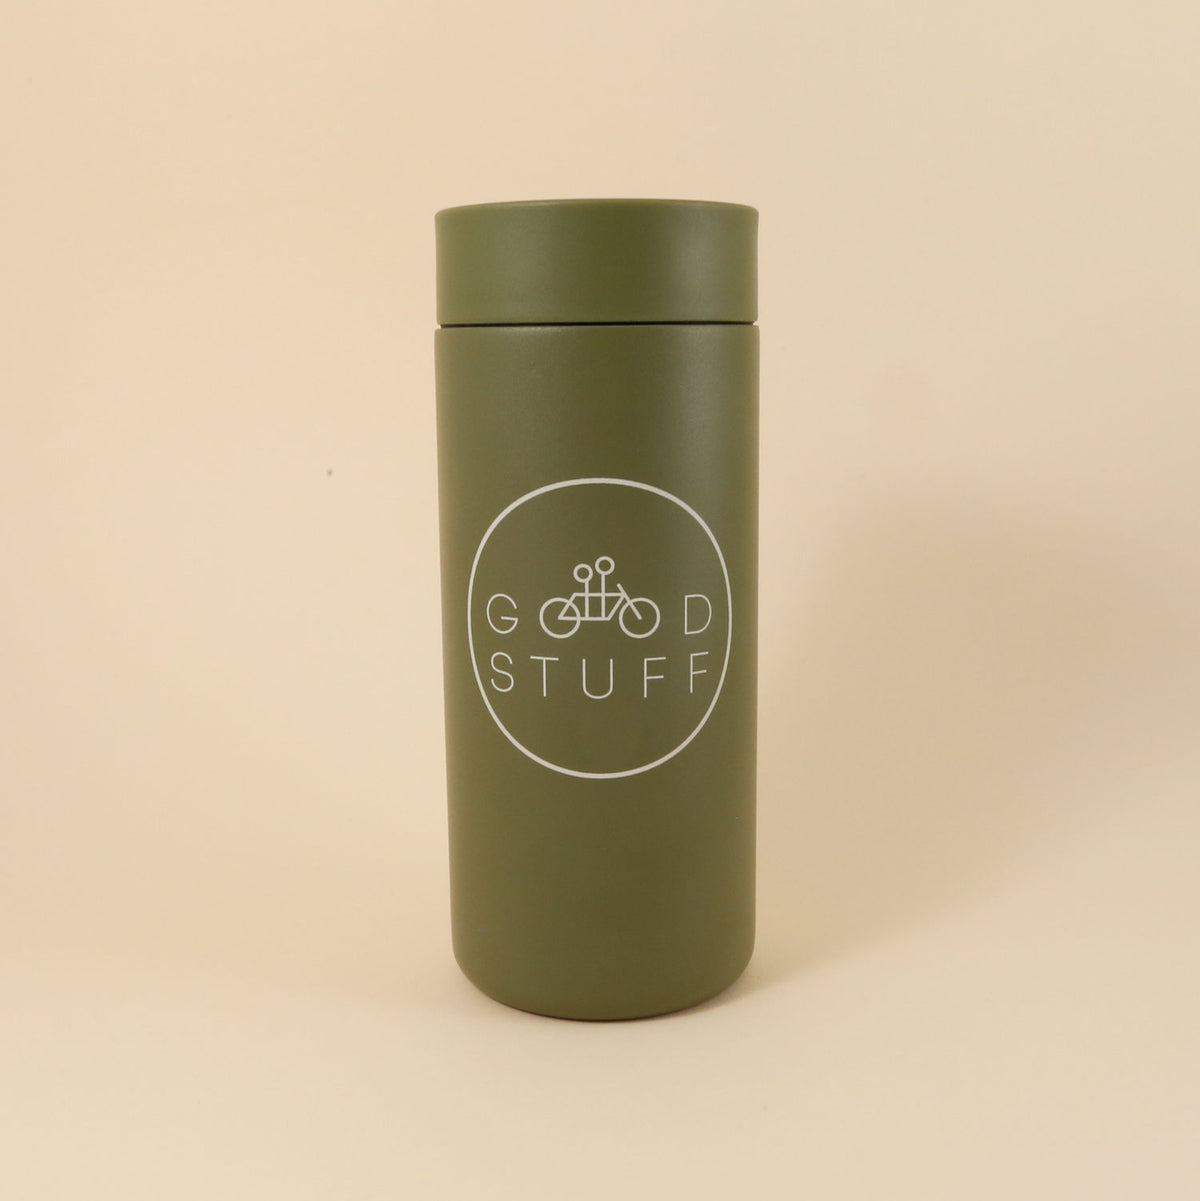 An MiiR 360 Traveler "GOOD STUFF" mug with a white logo featuring the text "good stuff" and a bicycle icon on a plain beige background.